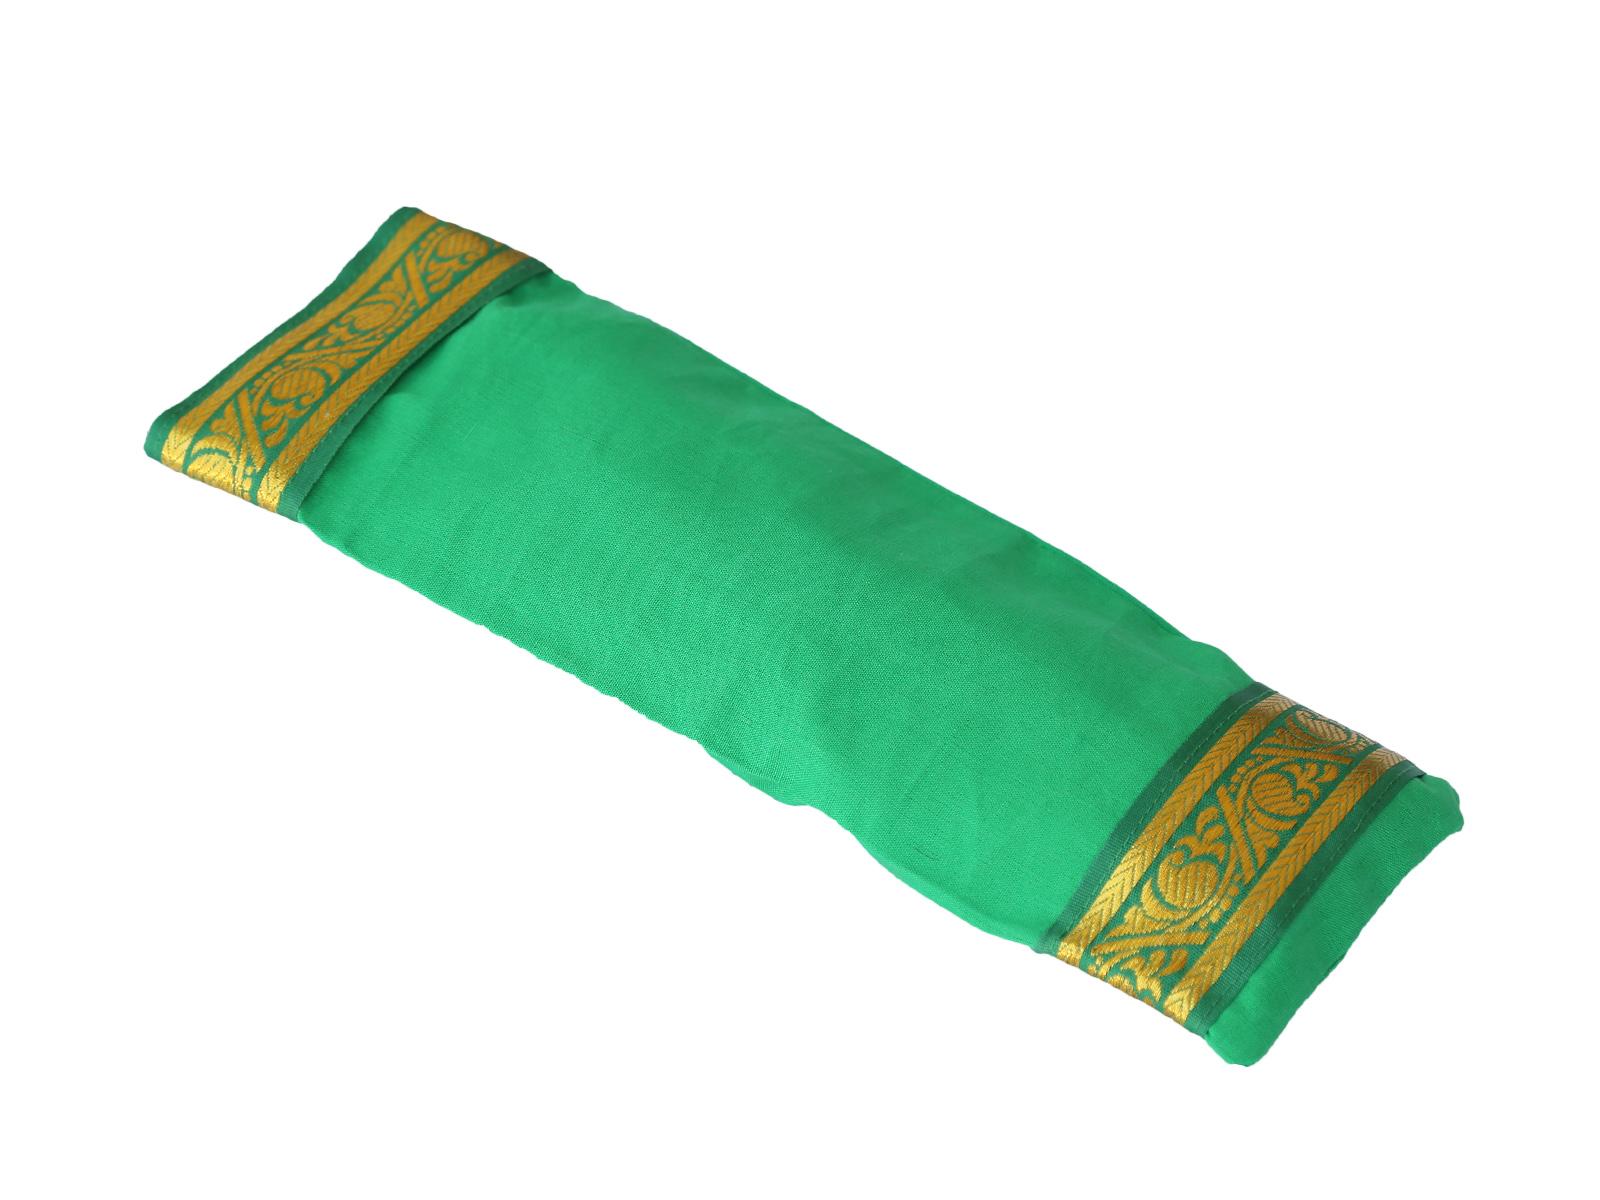 Heart warming Yoga Relaxation Green Linseed Cotton Cover Eye Pillow Gift Pack